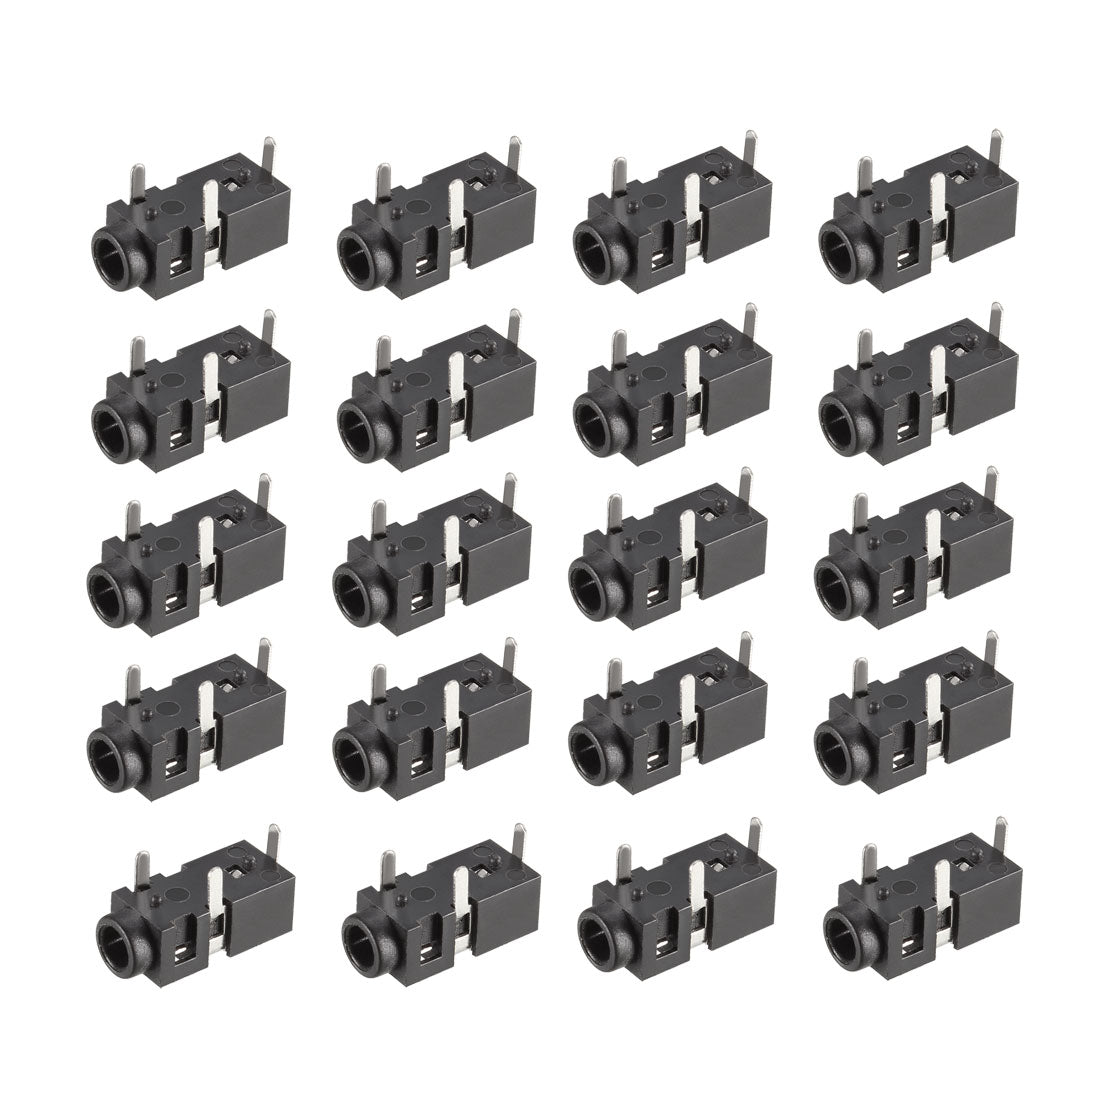 uxcell Uxcell PCB Mount 2.5mm 3 Pin Socket Headphone Stereo Jack Audio Video Connector PJ208 Black 20Pcs